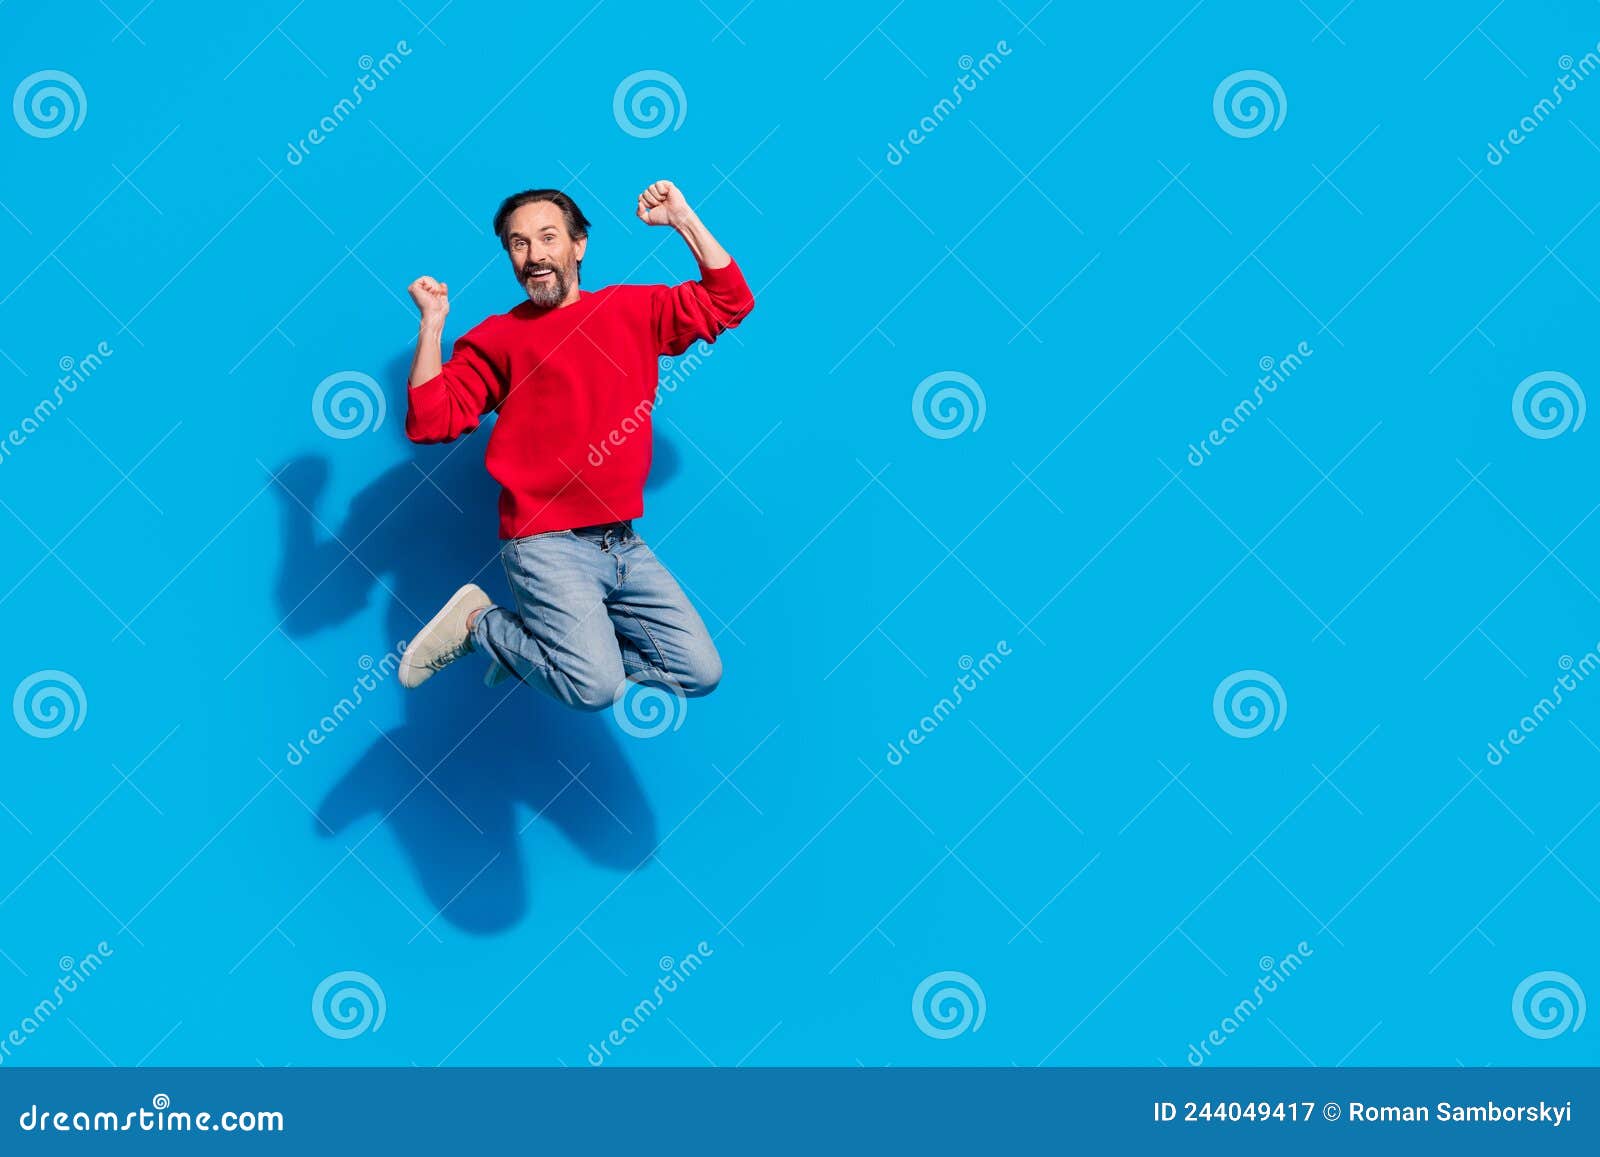 Full Size Photo Of Funky Rejoiced Male Jumping Raise Fists In Victory